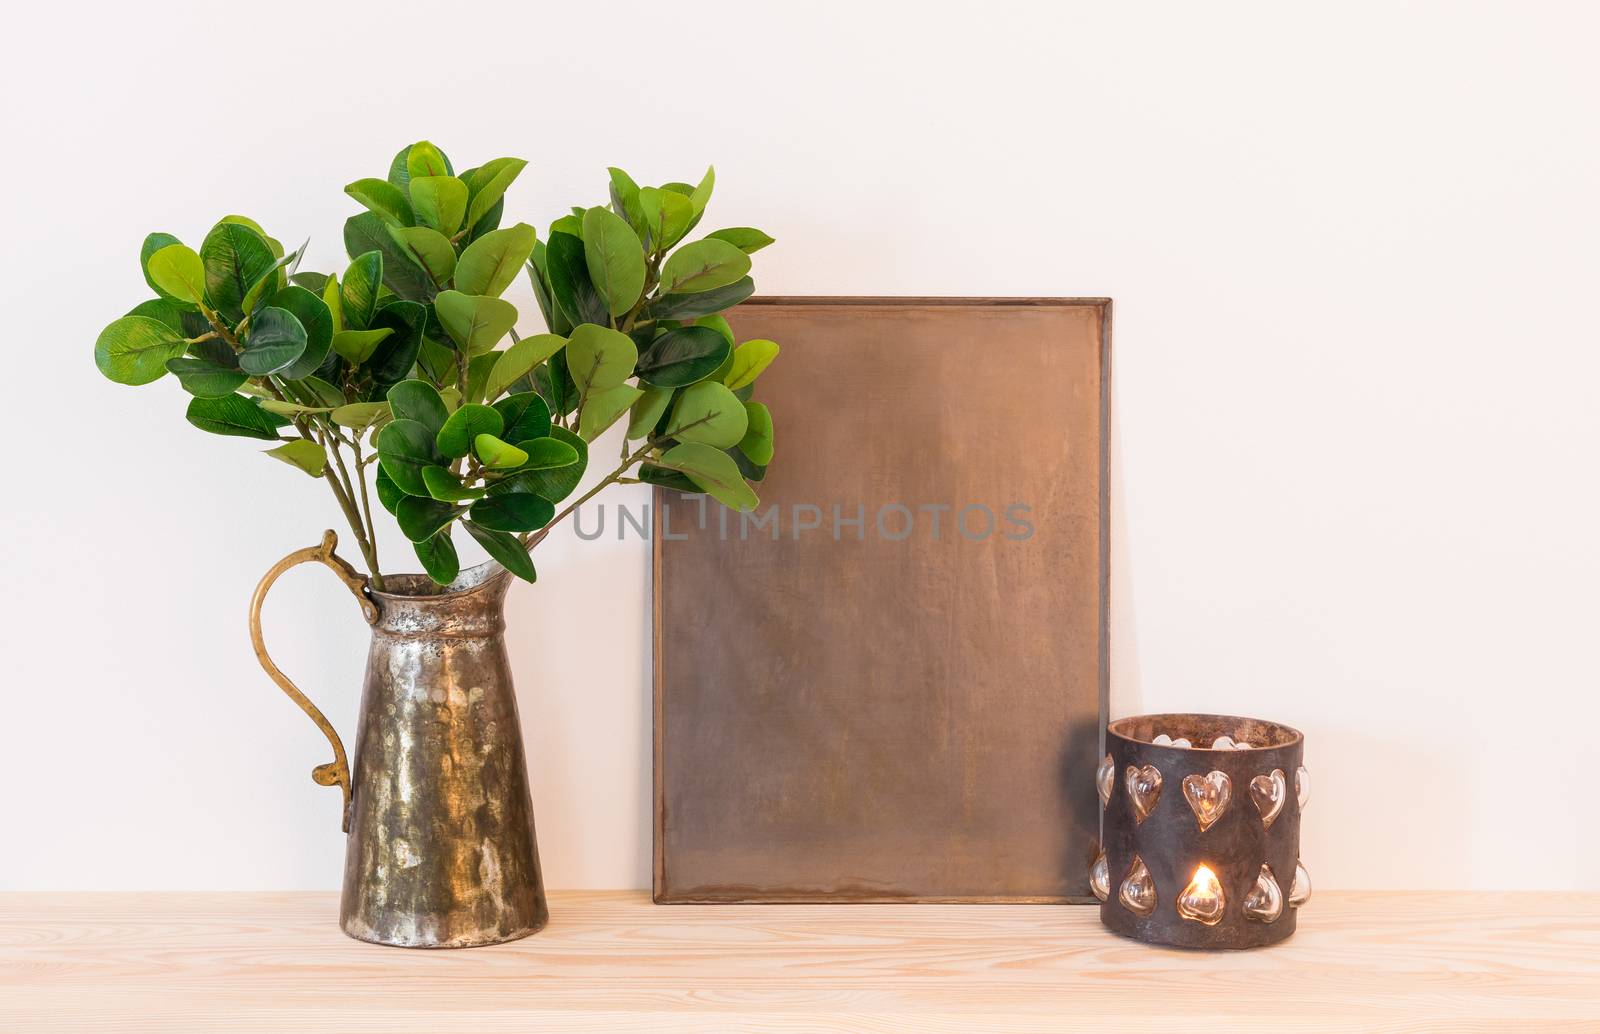 Vintage style home decor composition. Metal frame with copy space, ficus in antique jar and candle.